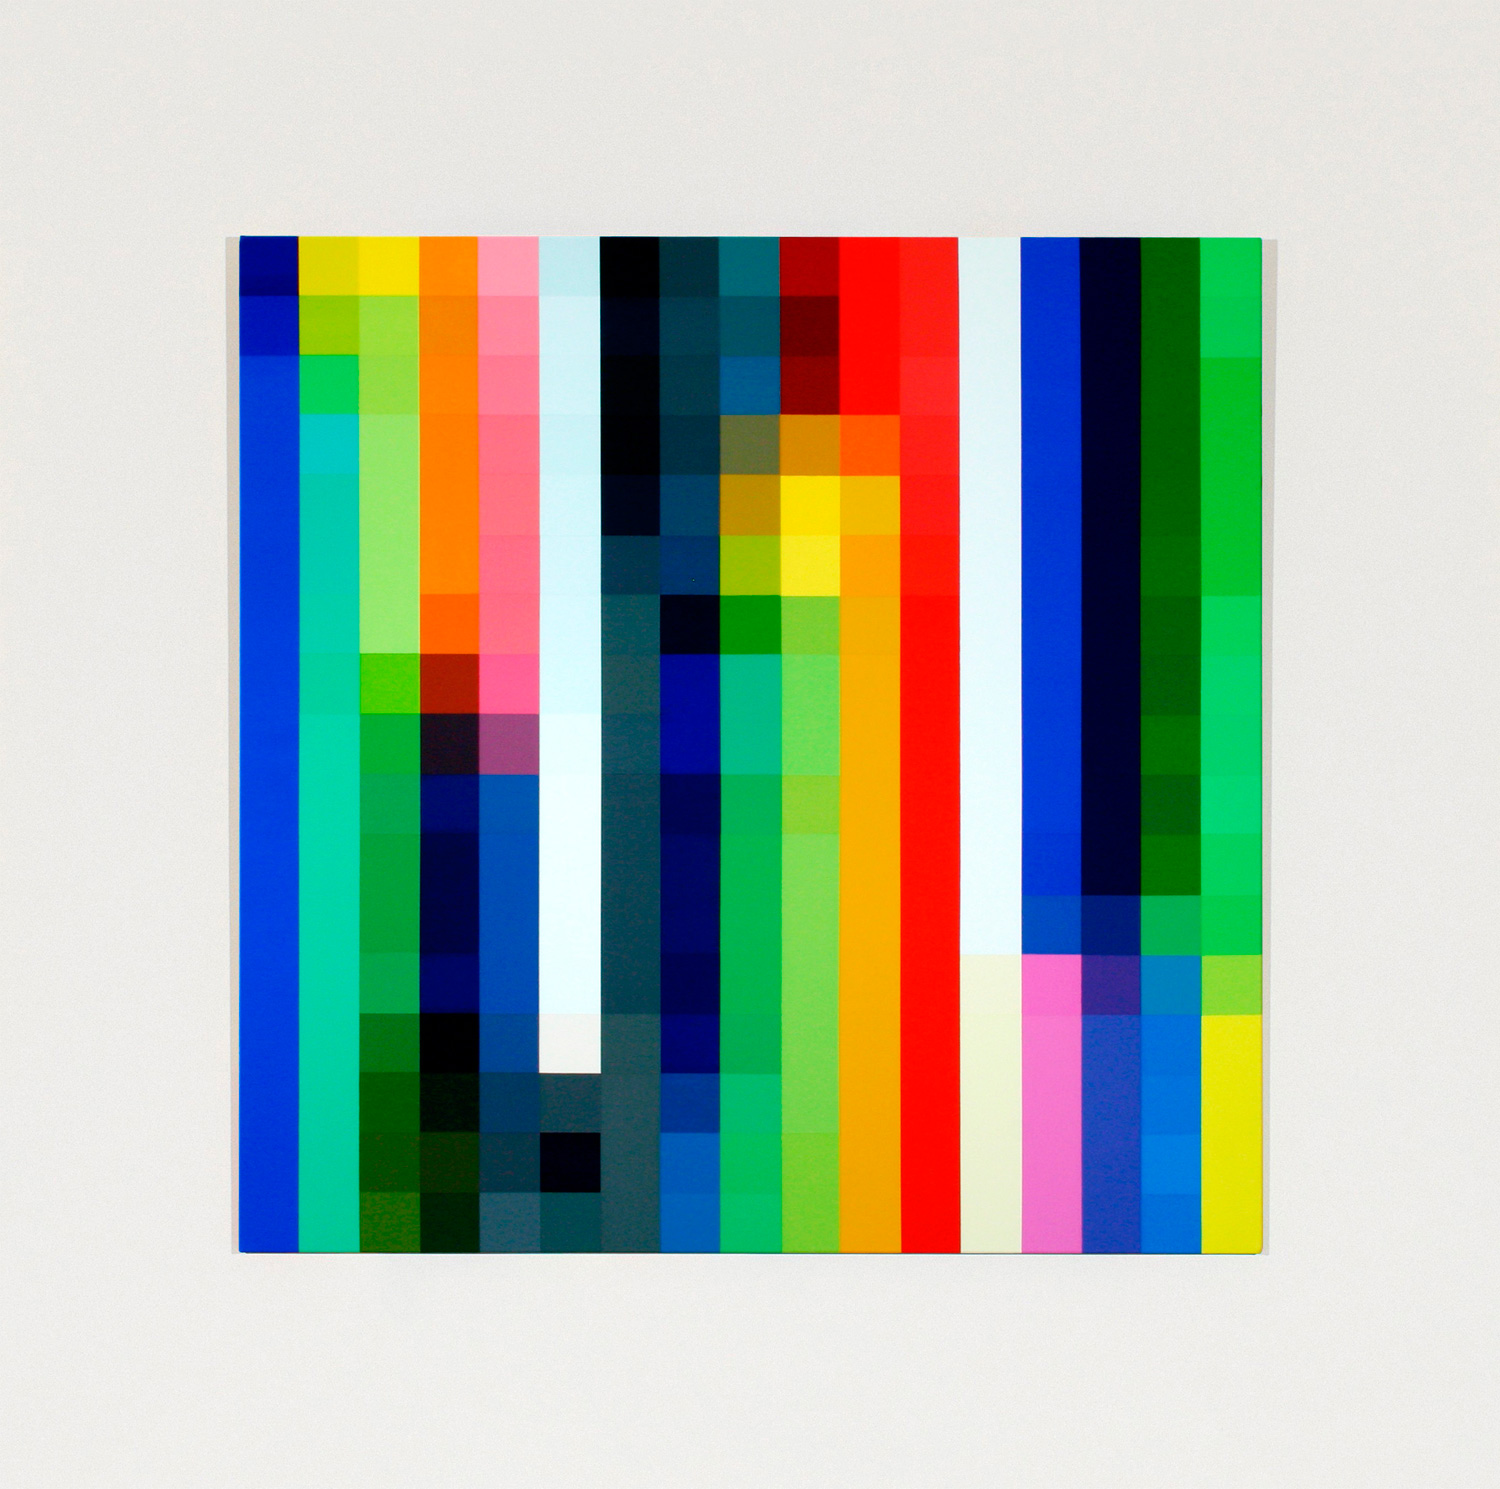   Spectrum Shift #5A  From the series  Text of Light,&nbsp; 2004 - 2005 Synthetic polymer paint on linen,&nbsp;122 x 122cm 